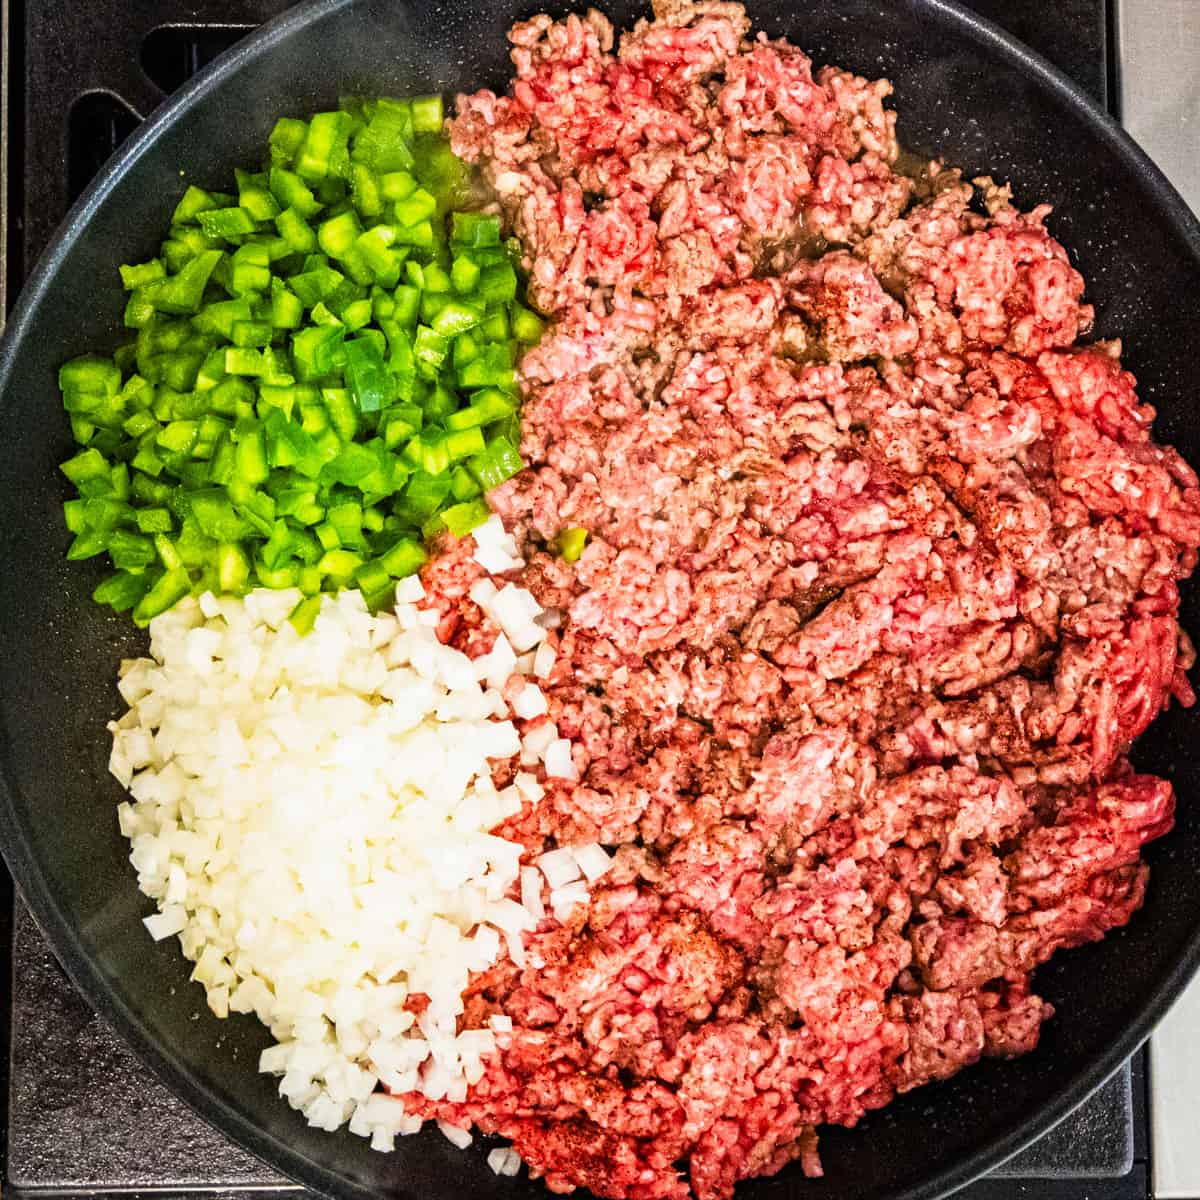 Ground beef in a large pan with diced green pepper and onion.